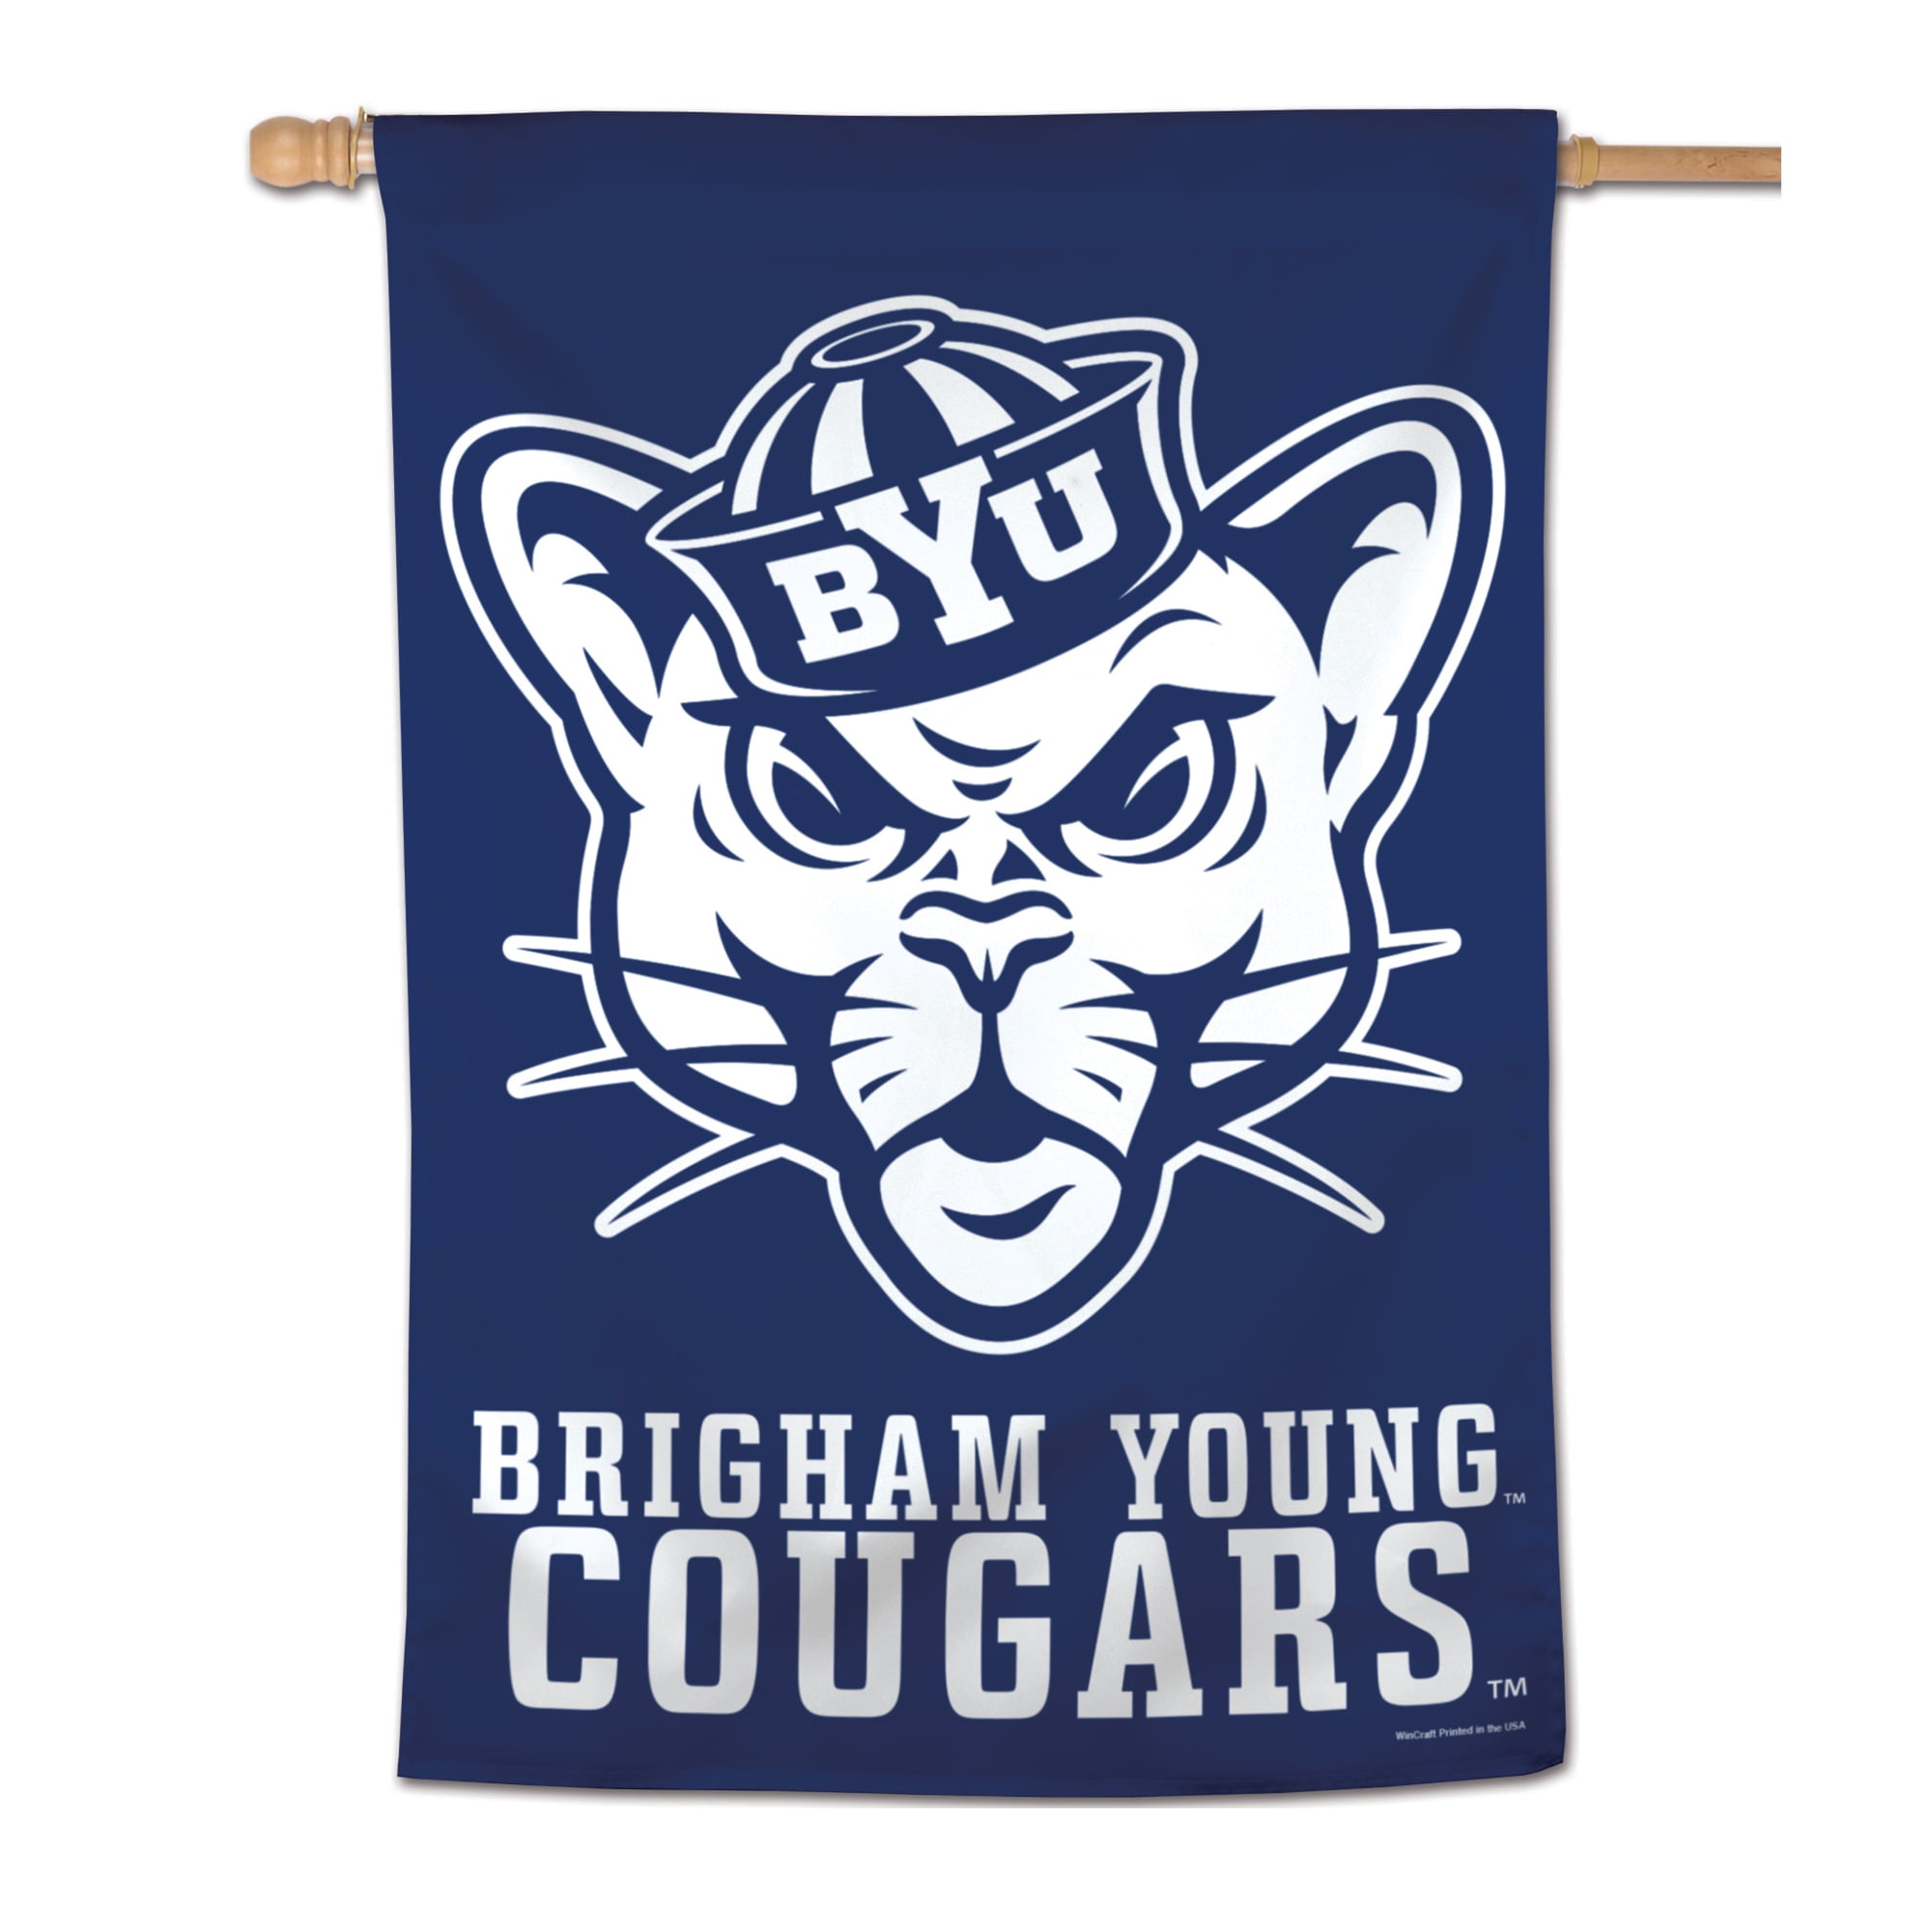 Brigham Young Cougars Vintage Garden Flag and Yard Banner 